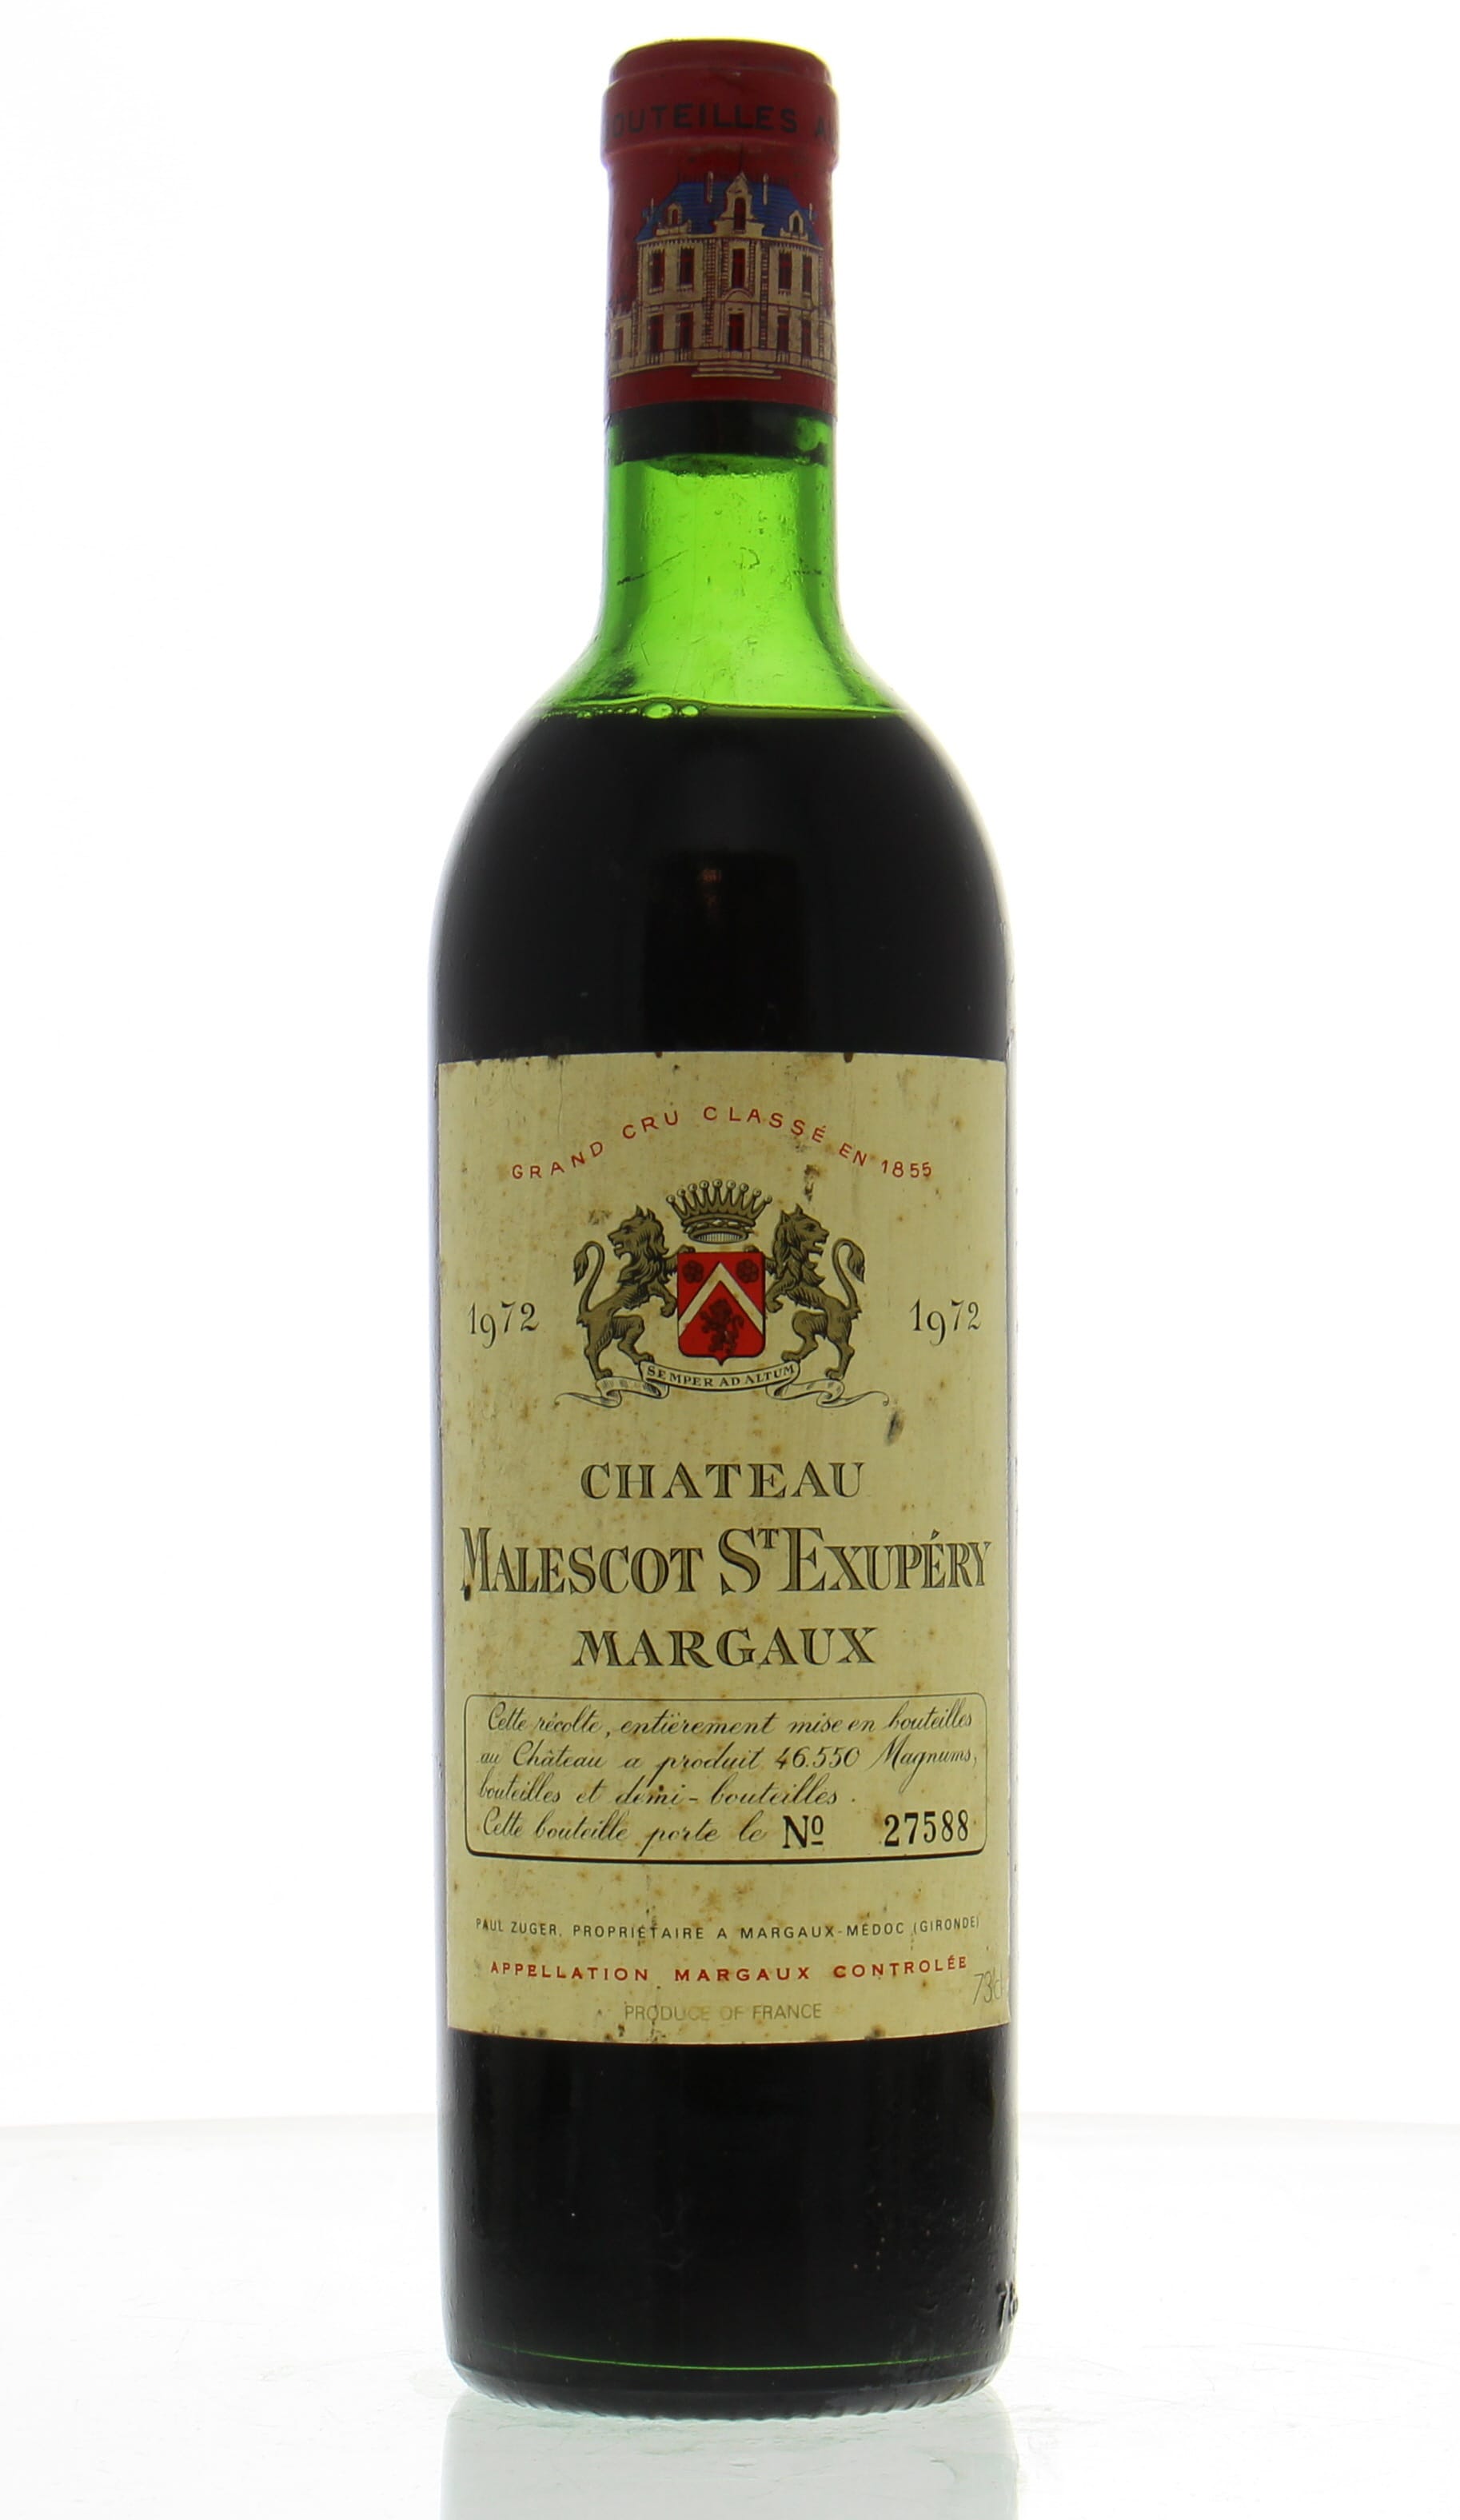 Chateau Malescot-St-Exupery - Chateau Malescot-St-Exupery 1972 High shoulder